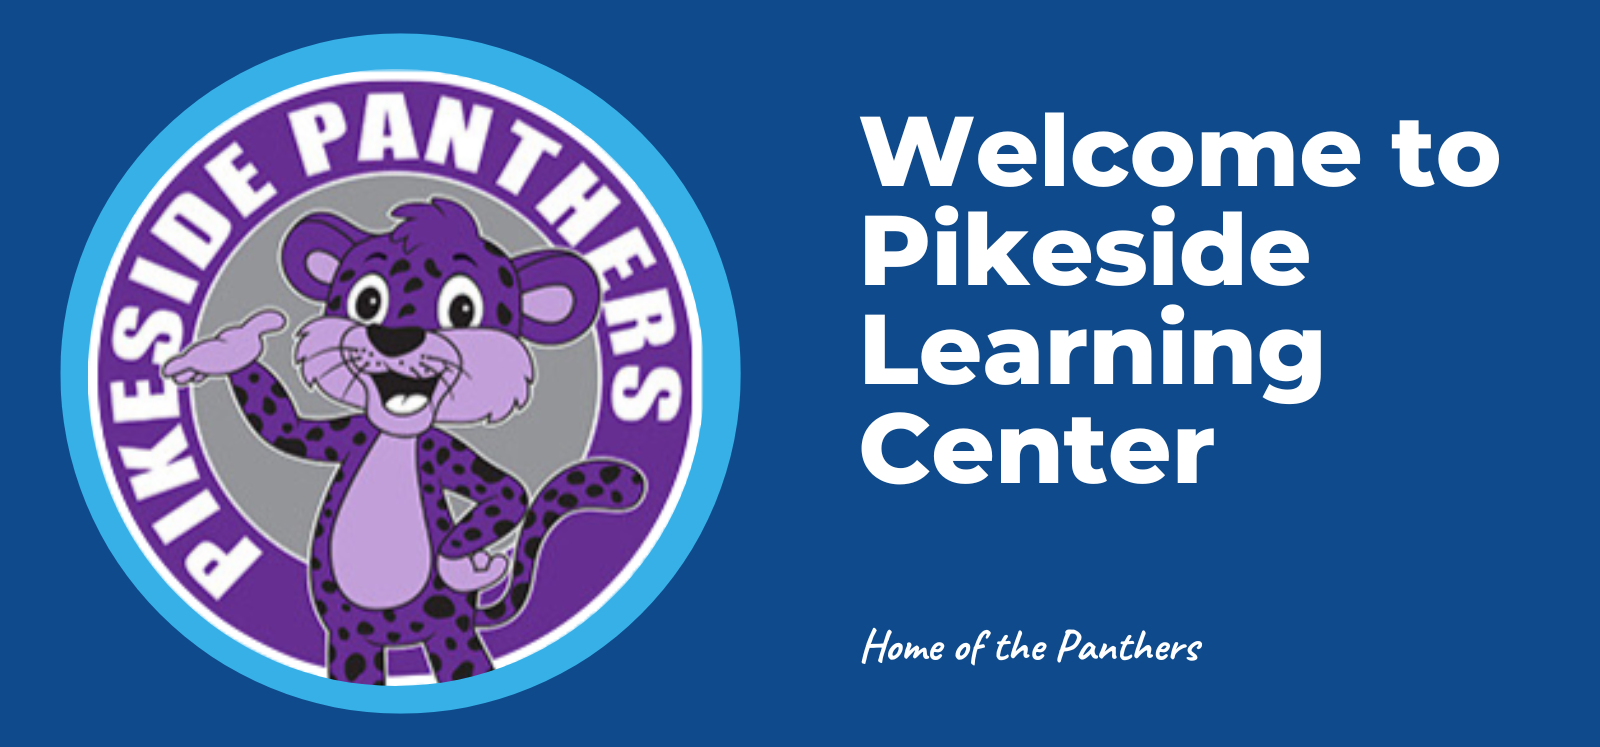 image of welcome to pikeside learning center with text that says home of the panthers